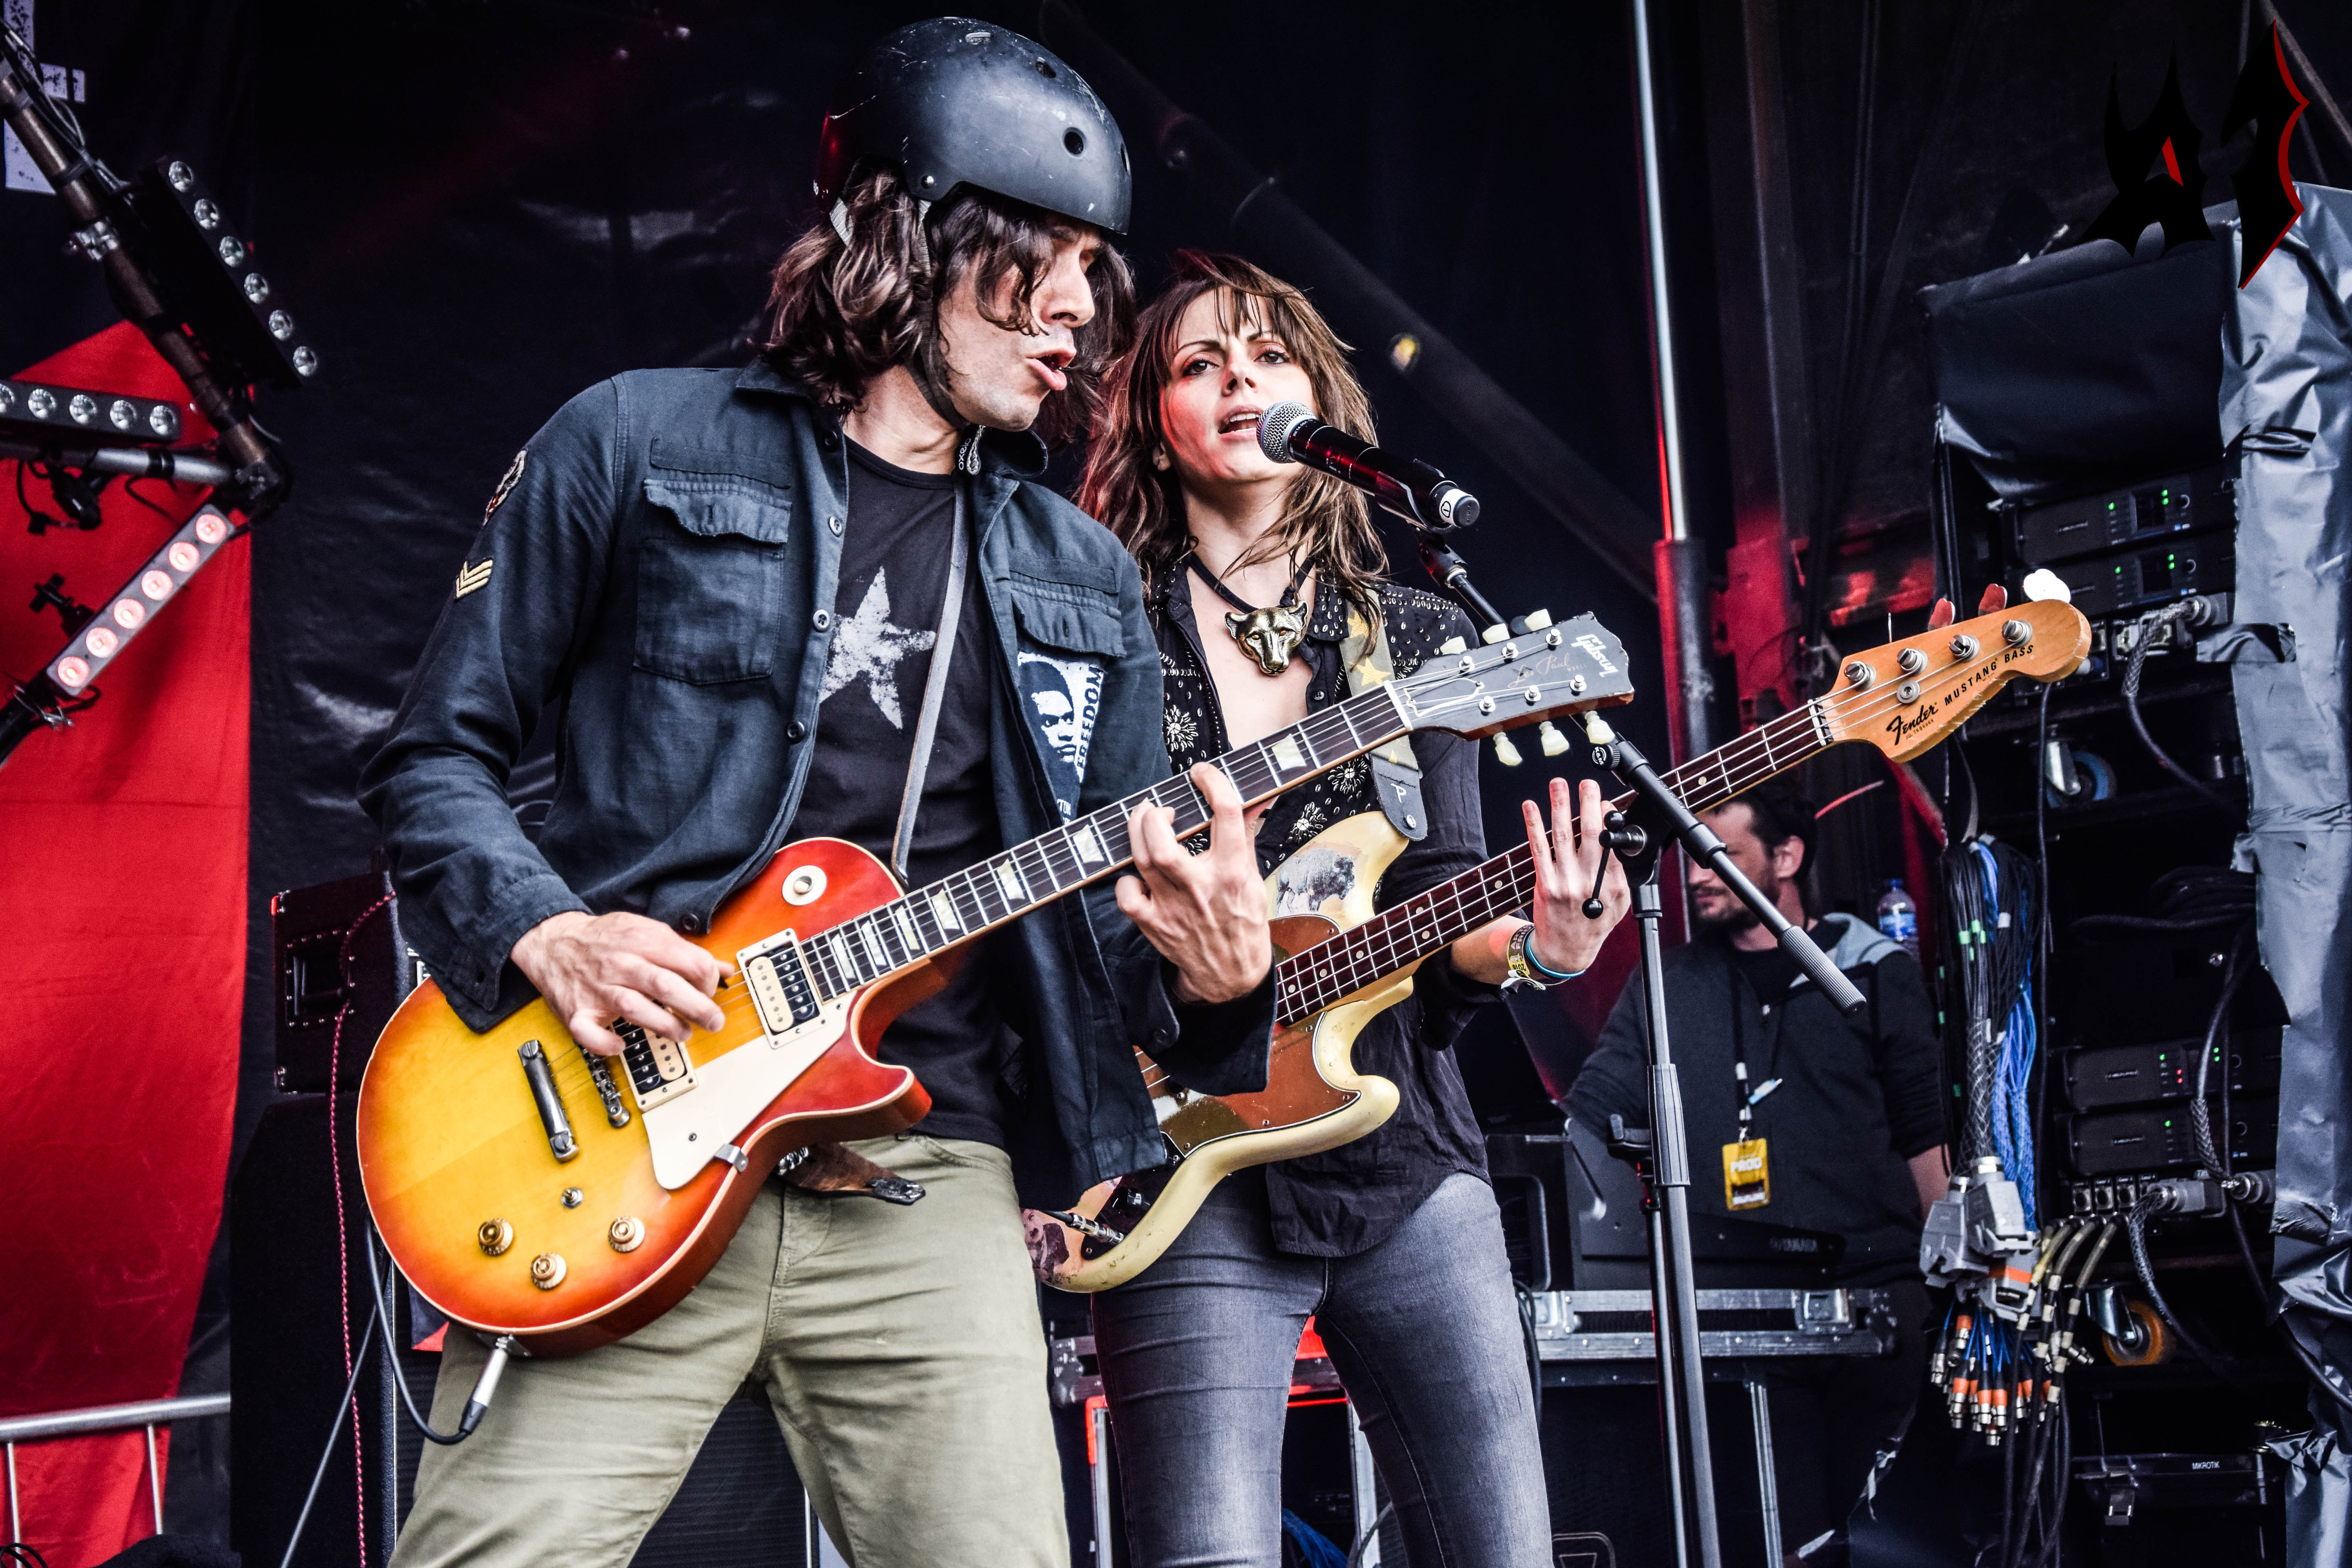 Donwload 2018 – Day 3 - The Last Internationale 20